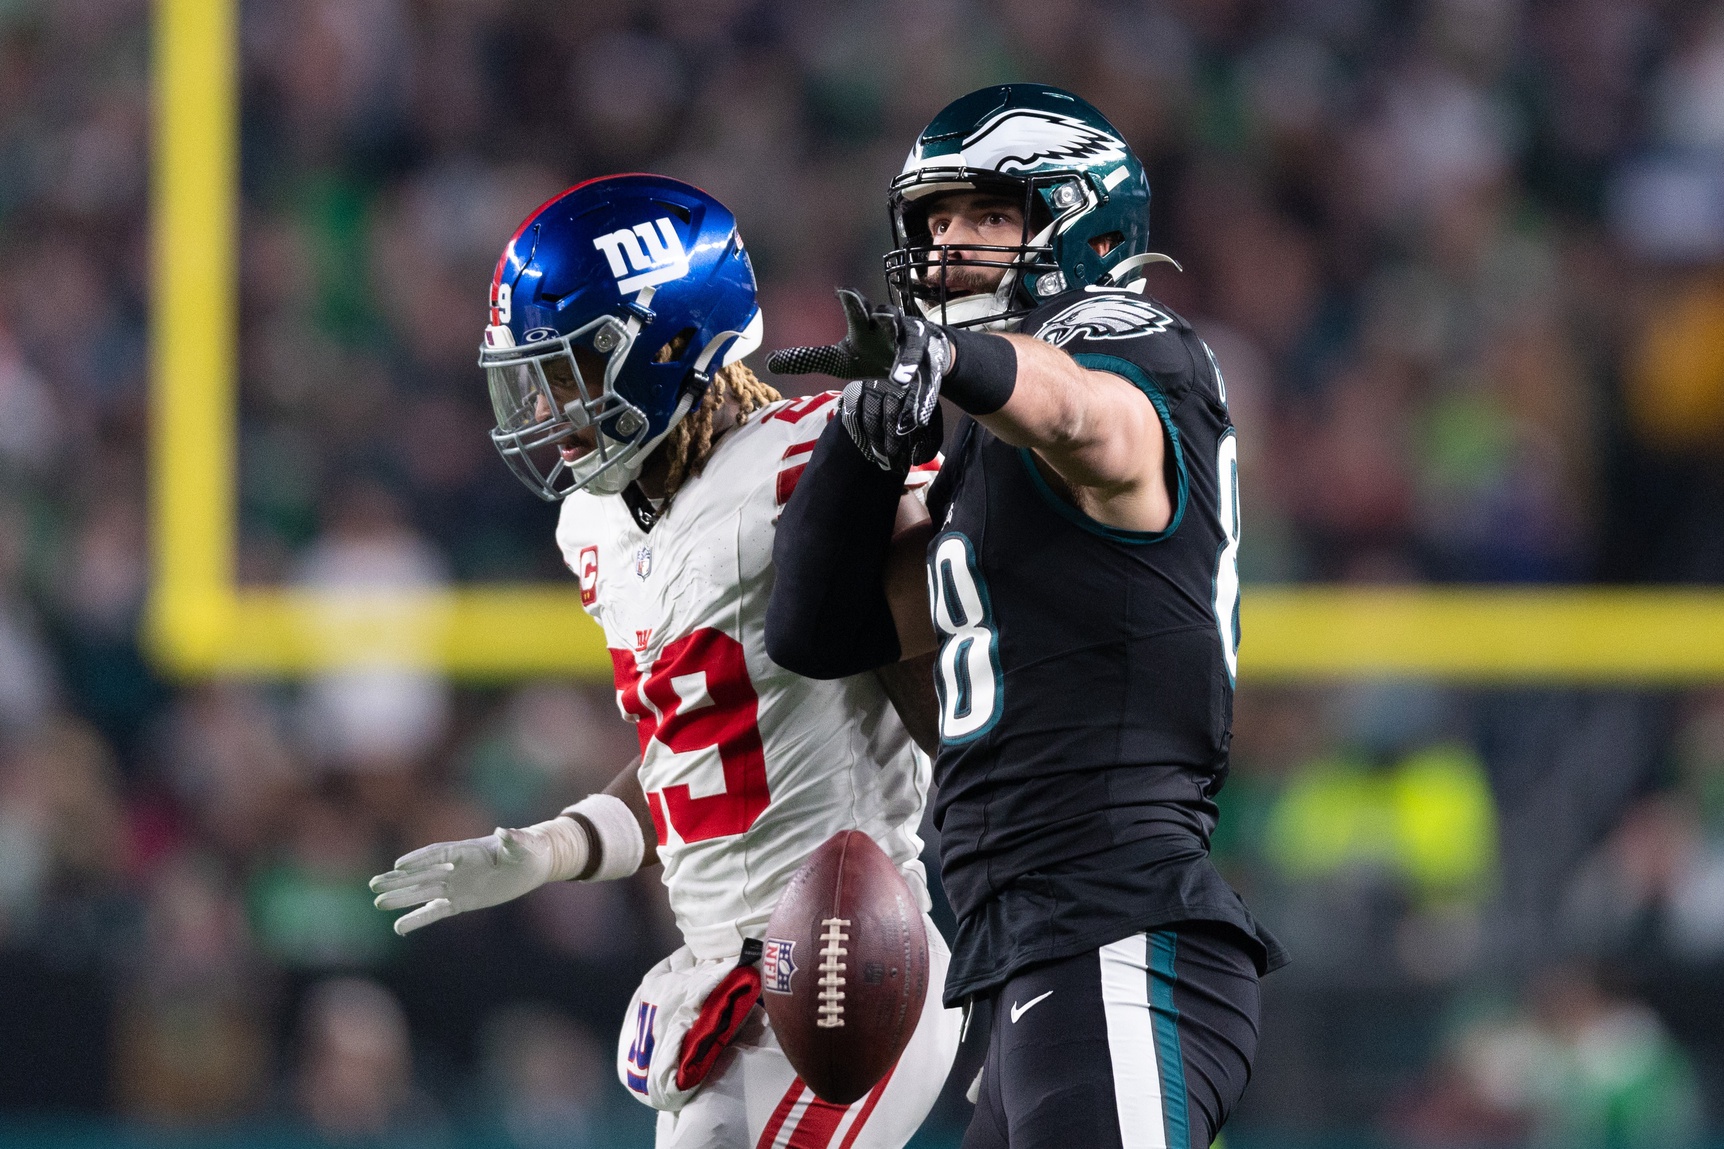 Philadelphia Eagles tight end Dallas Goedert (88) reacts in front of New York Giants safety Xavier McKinney (29) after his first down catch during the first quarter at Lincoln Financial Field.